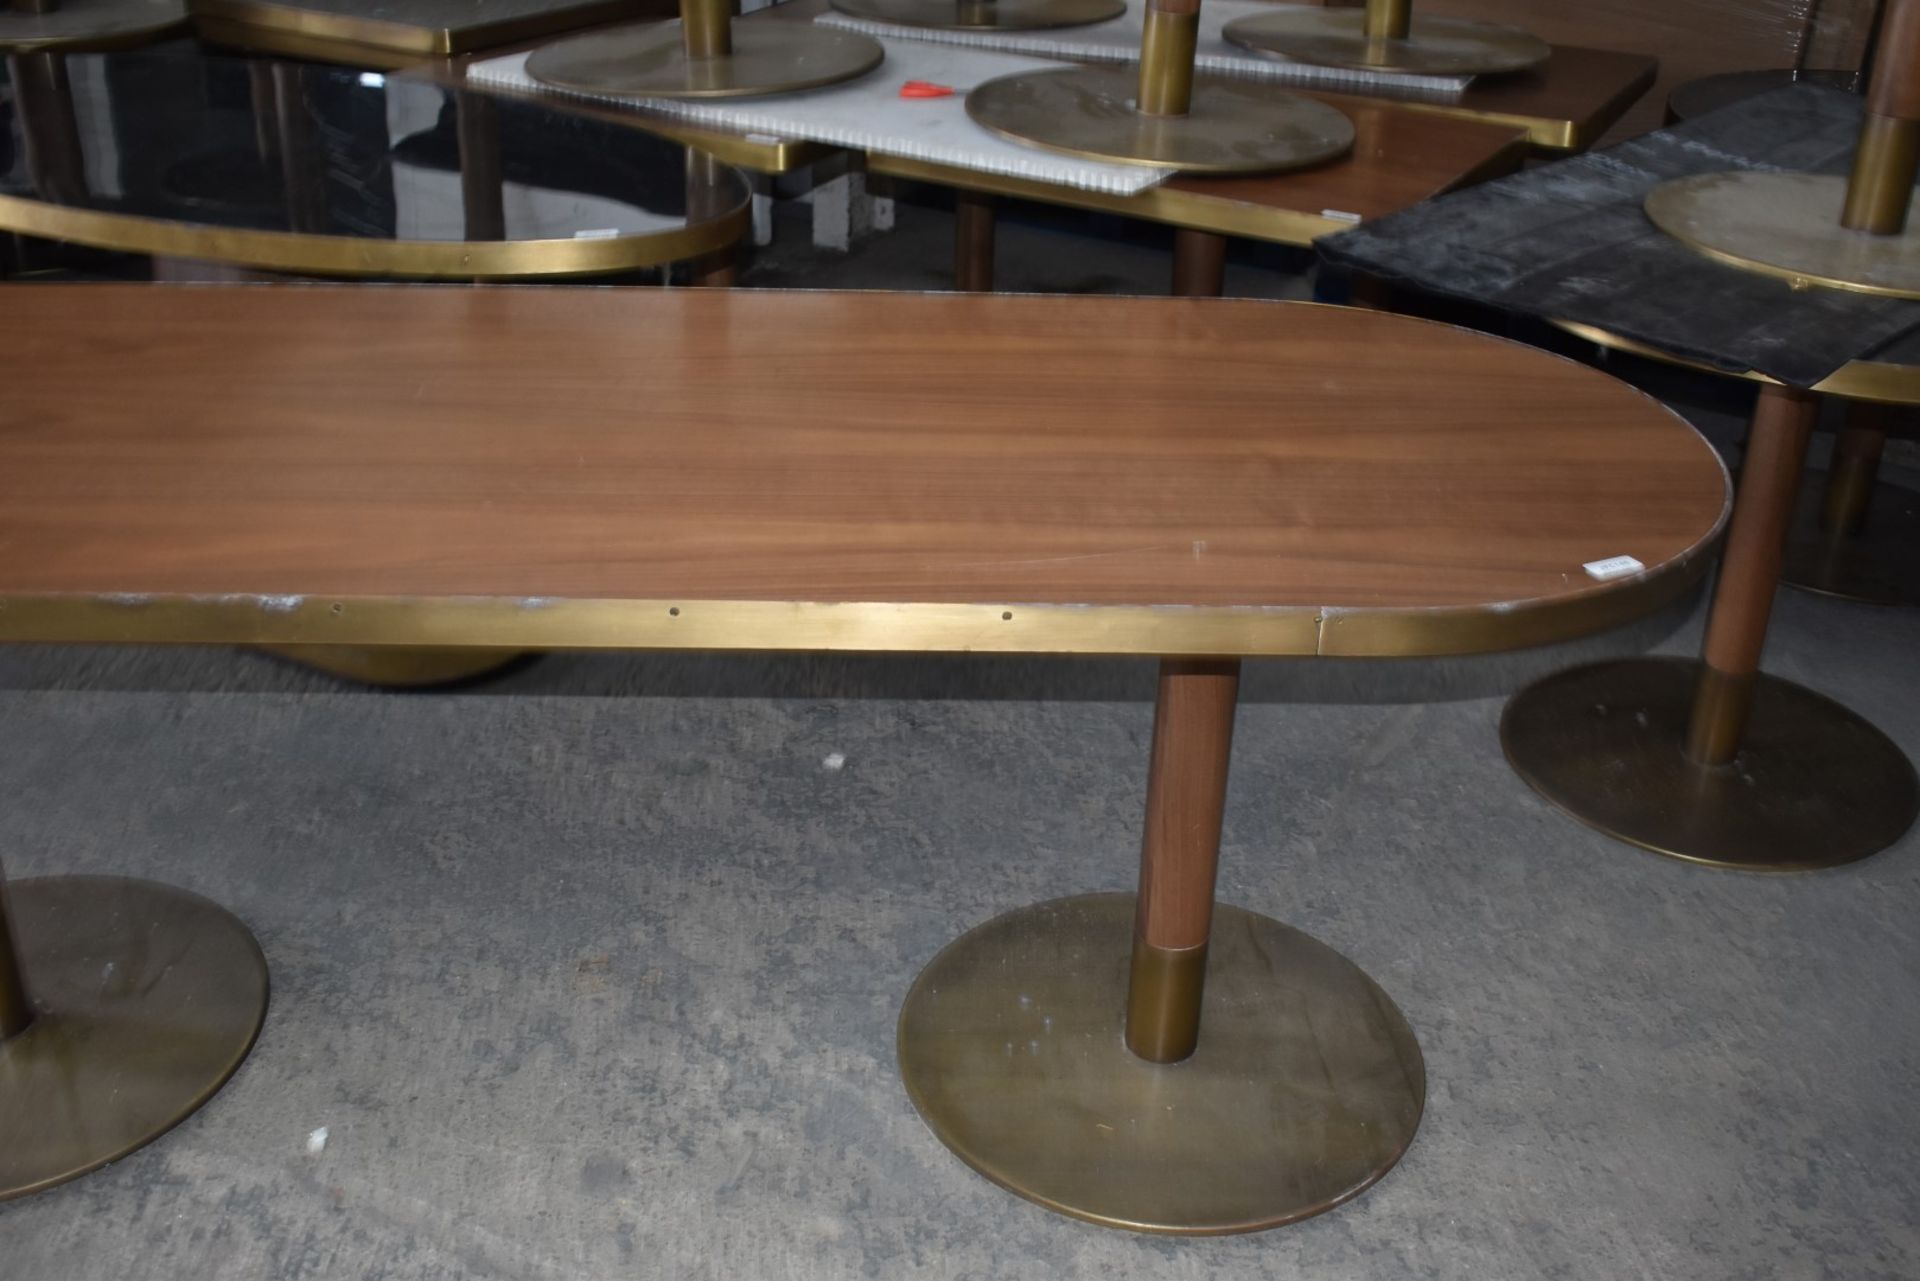 1 x Oval Banqueting Dining Table By AKP Design Athens - Walnut Top With Antique Brass Edging - Image 13 of 16